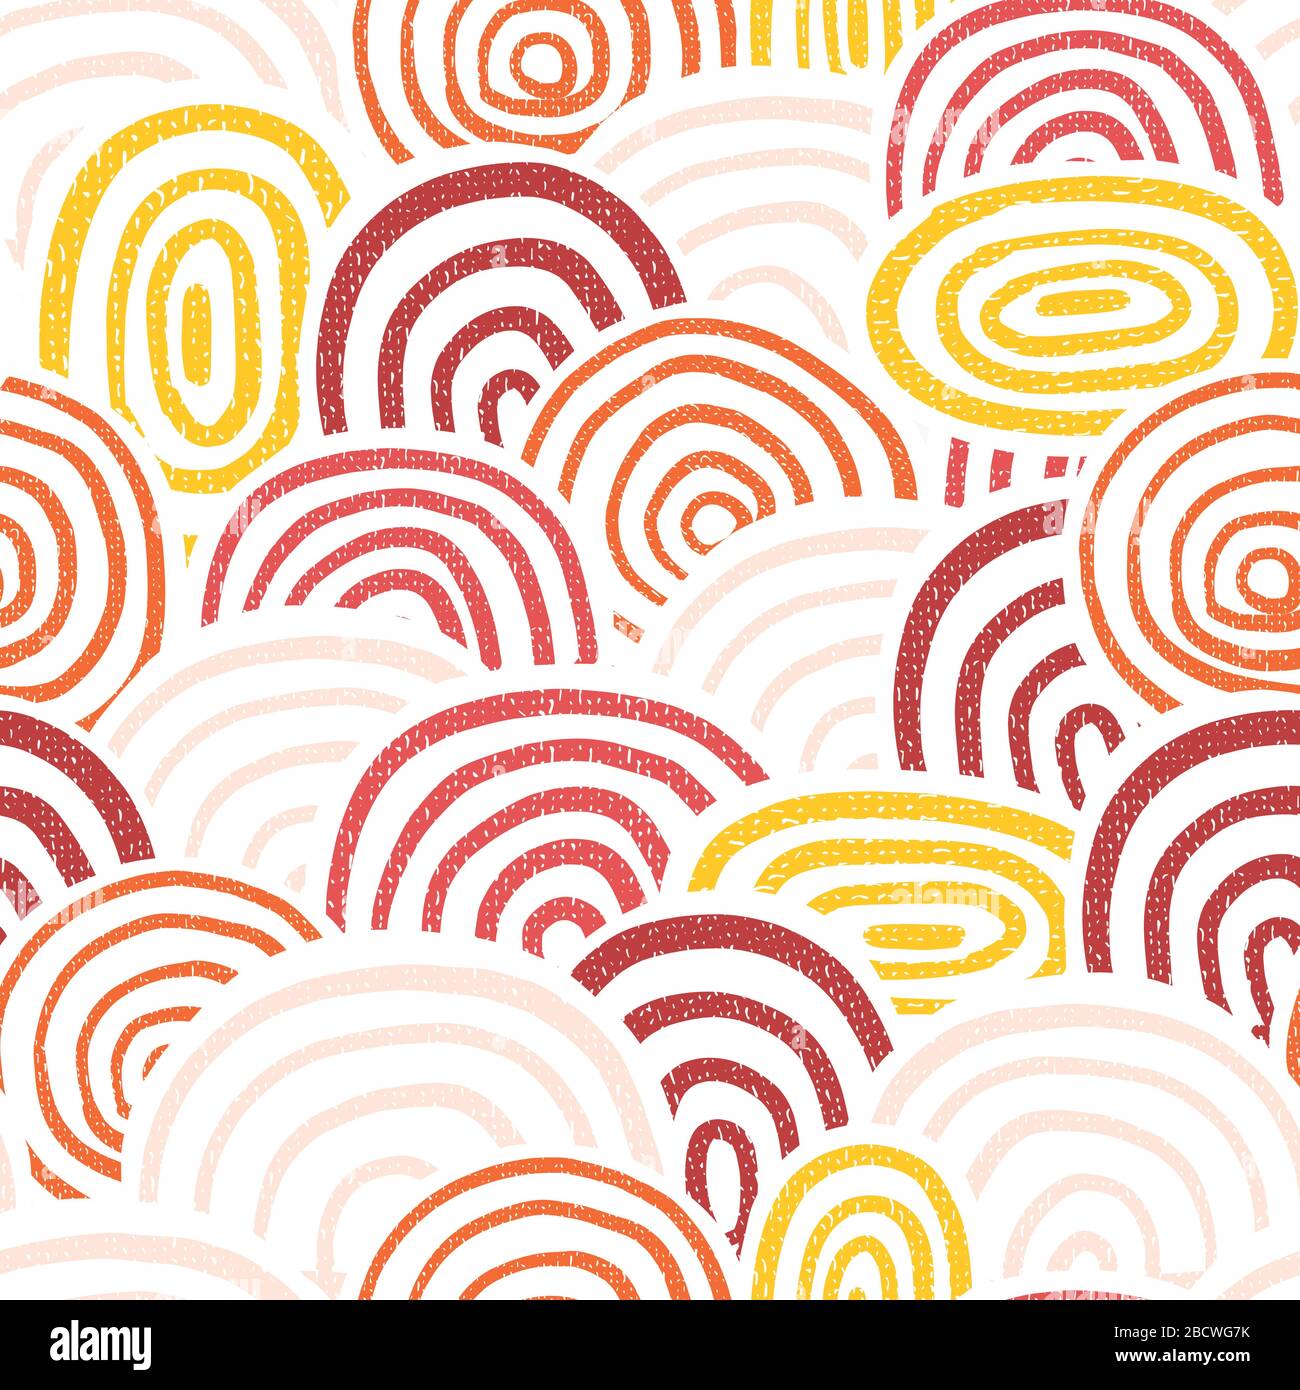 Circle collage seamless vector background. Modern textured rainbow circle shapes pattern red pink orange white. Abstract repeating summer design Stock Vector